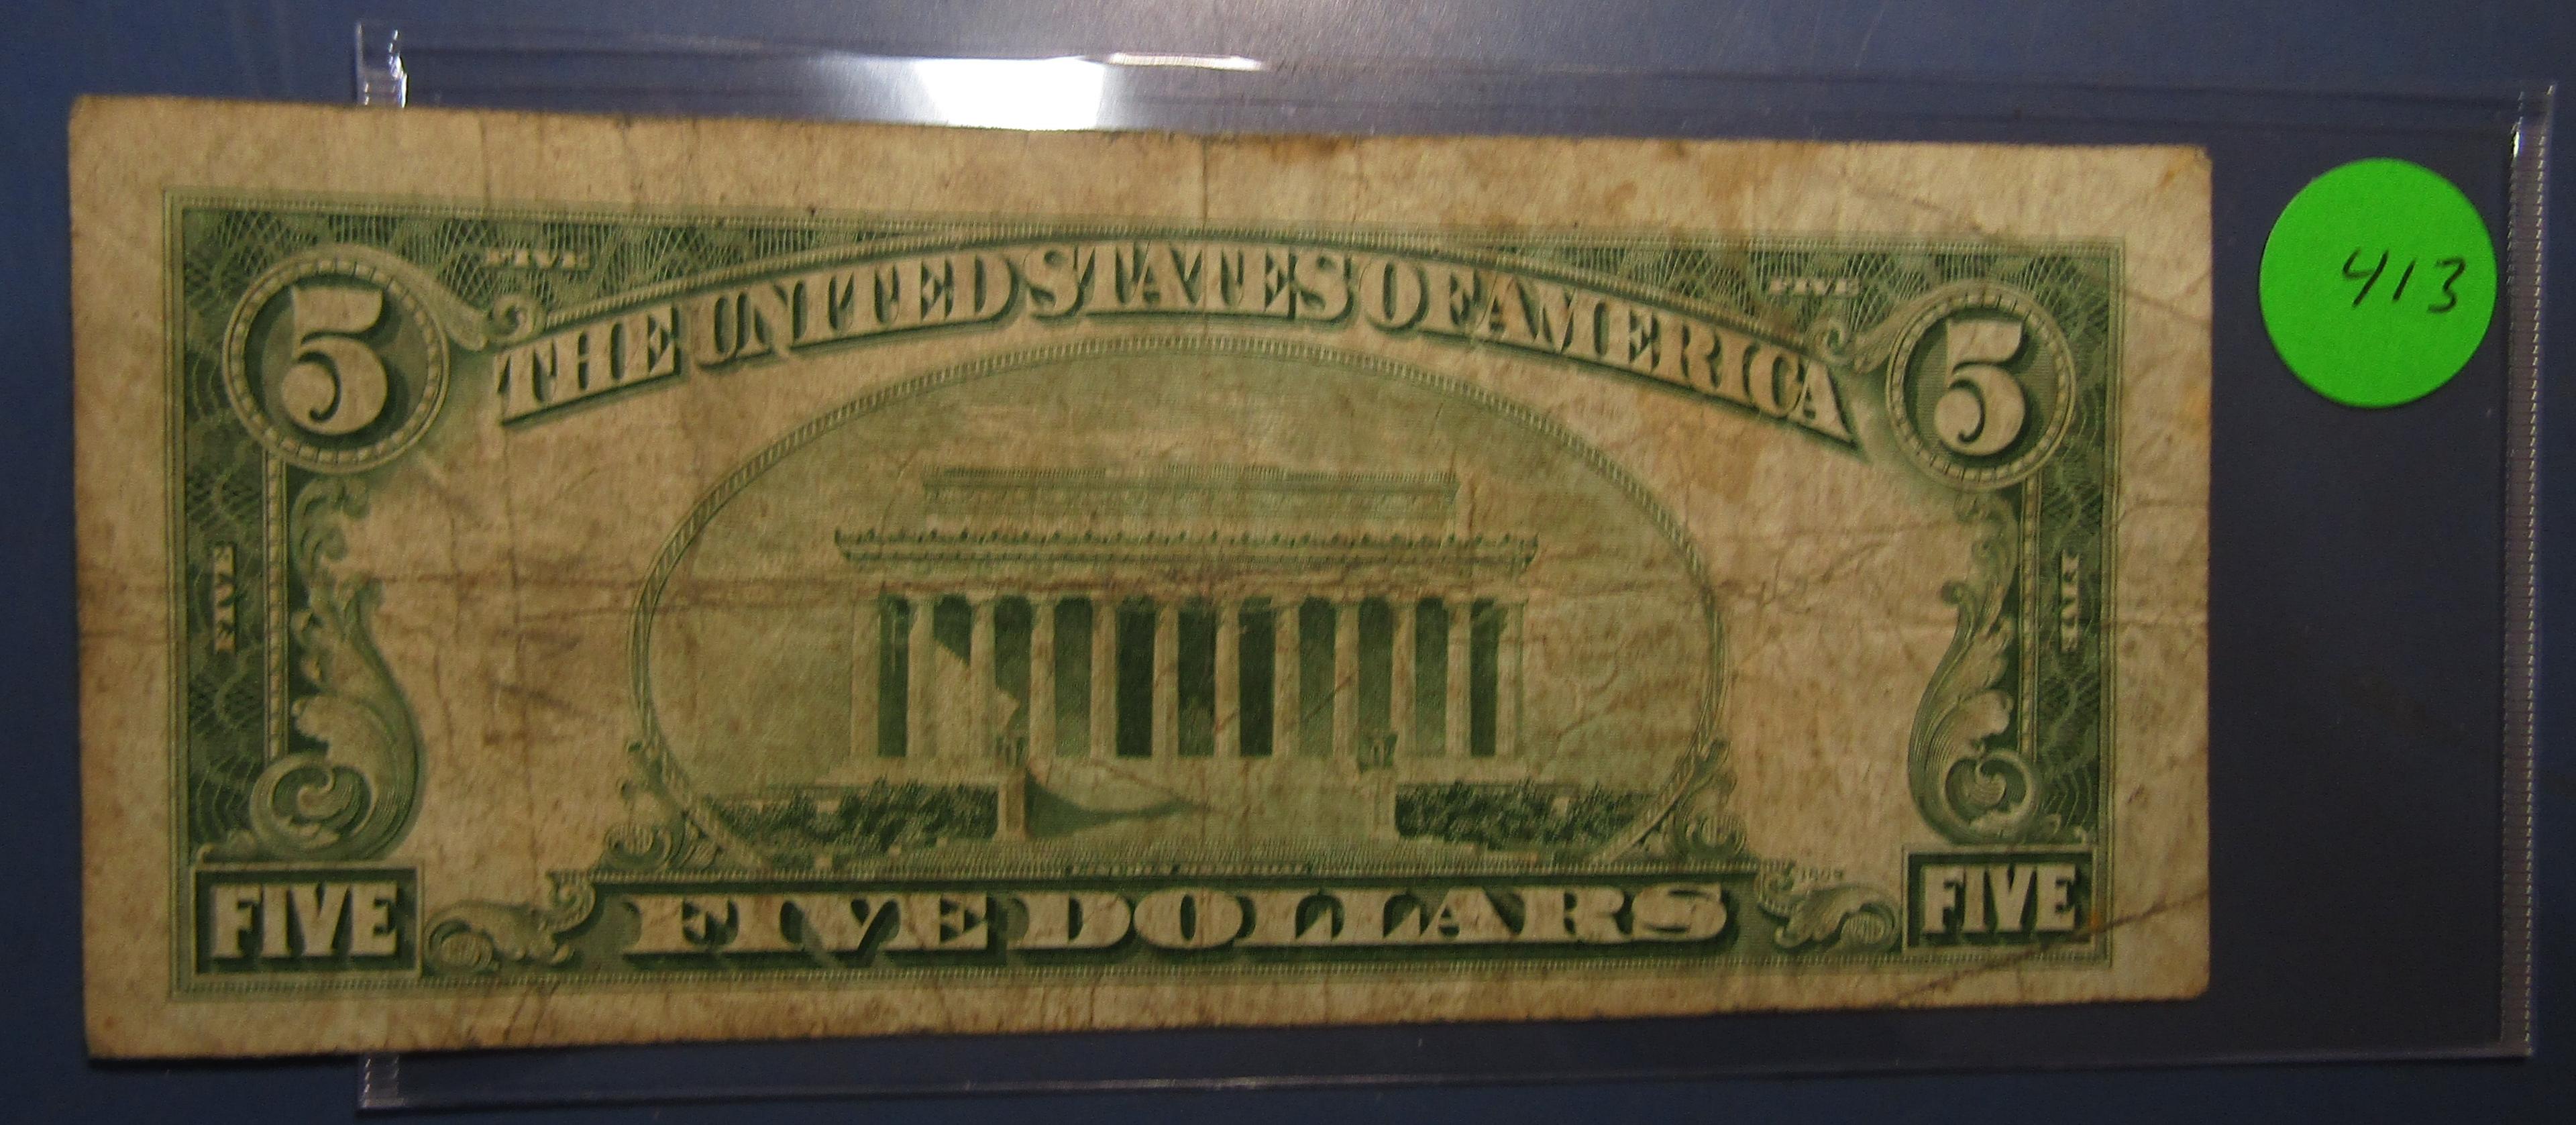 1928-E $5.00 RED SEAL US STAR NOTE VG